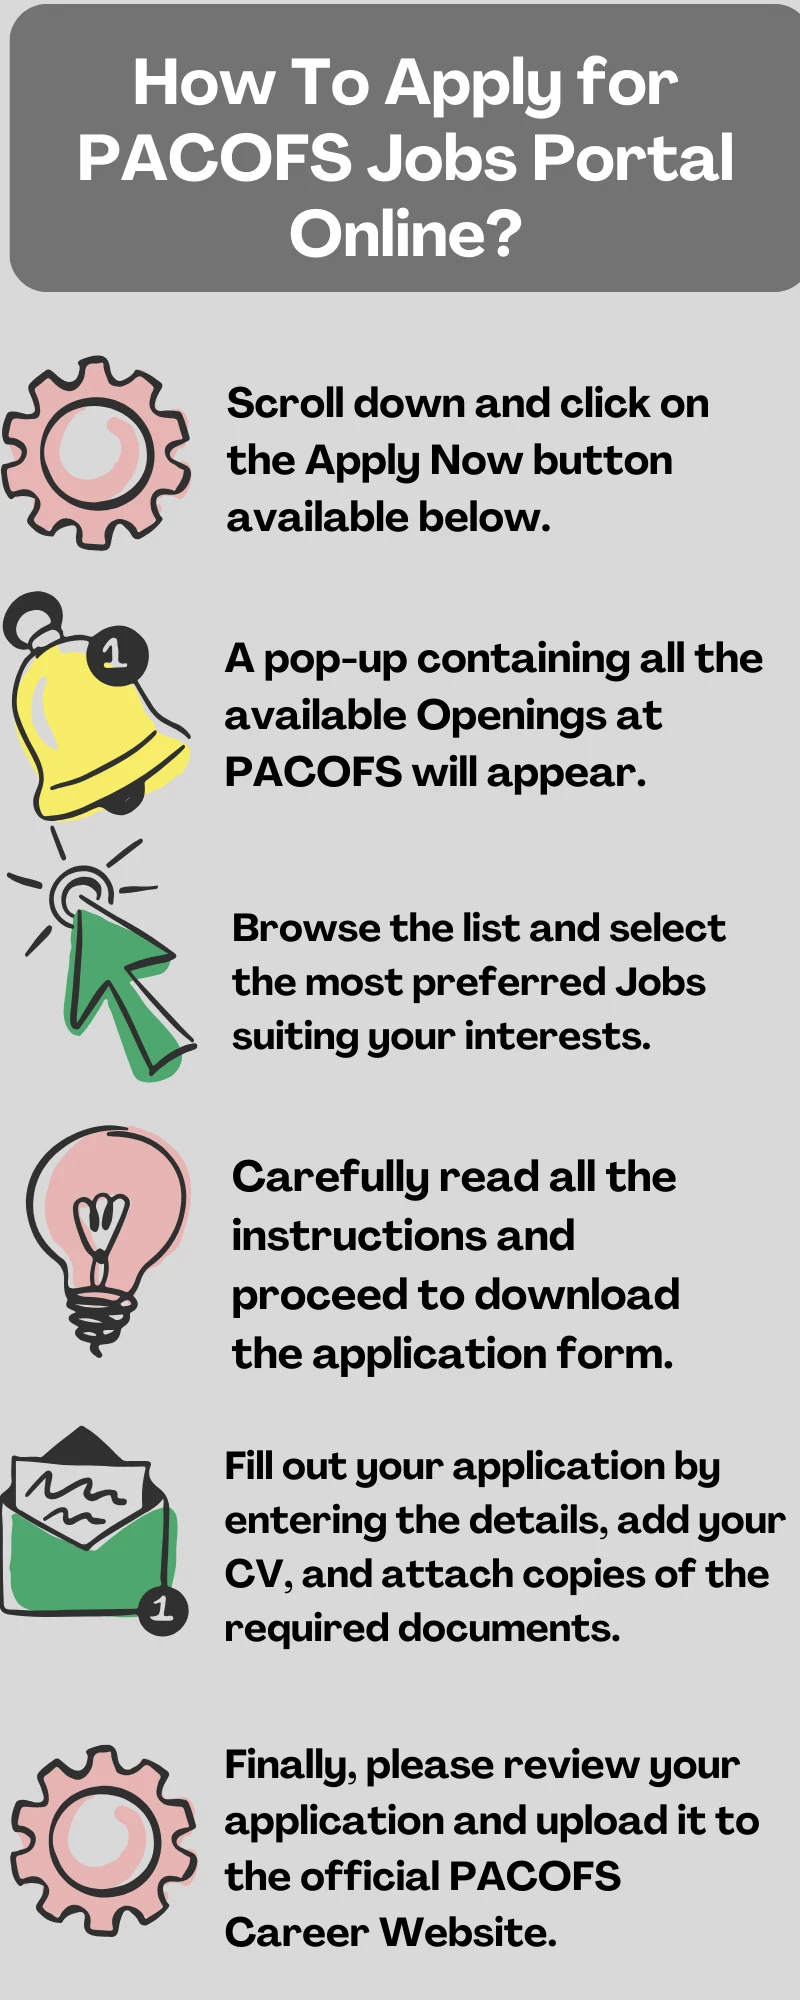 How To Apply for PACOFS Jobs Portal Online?